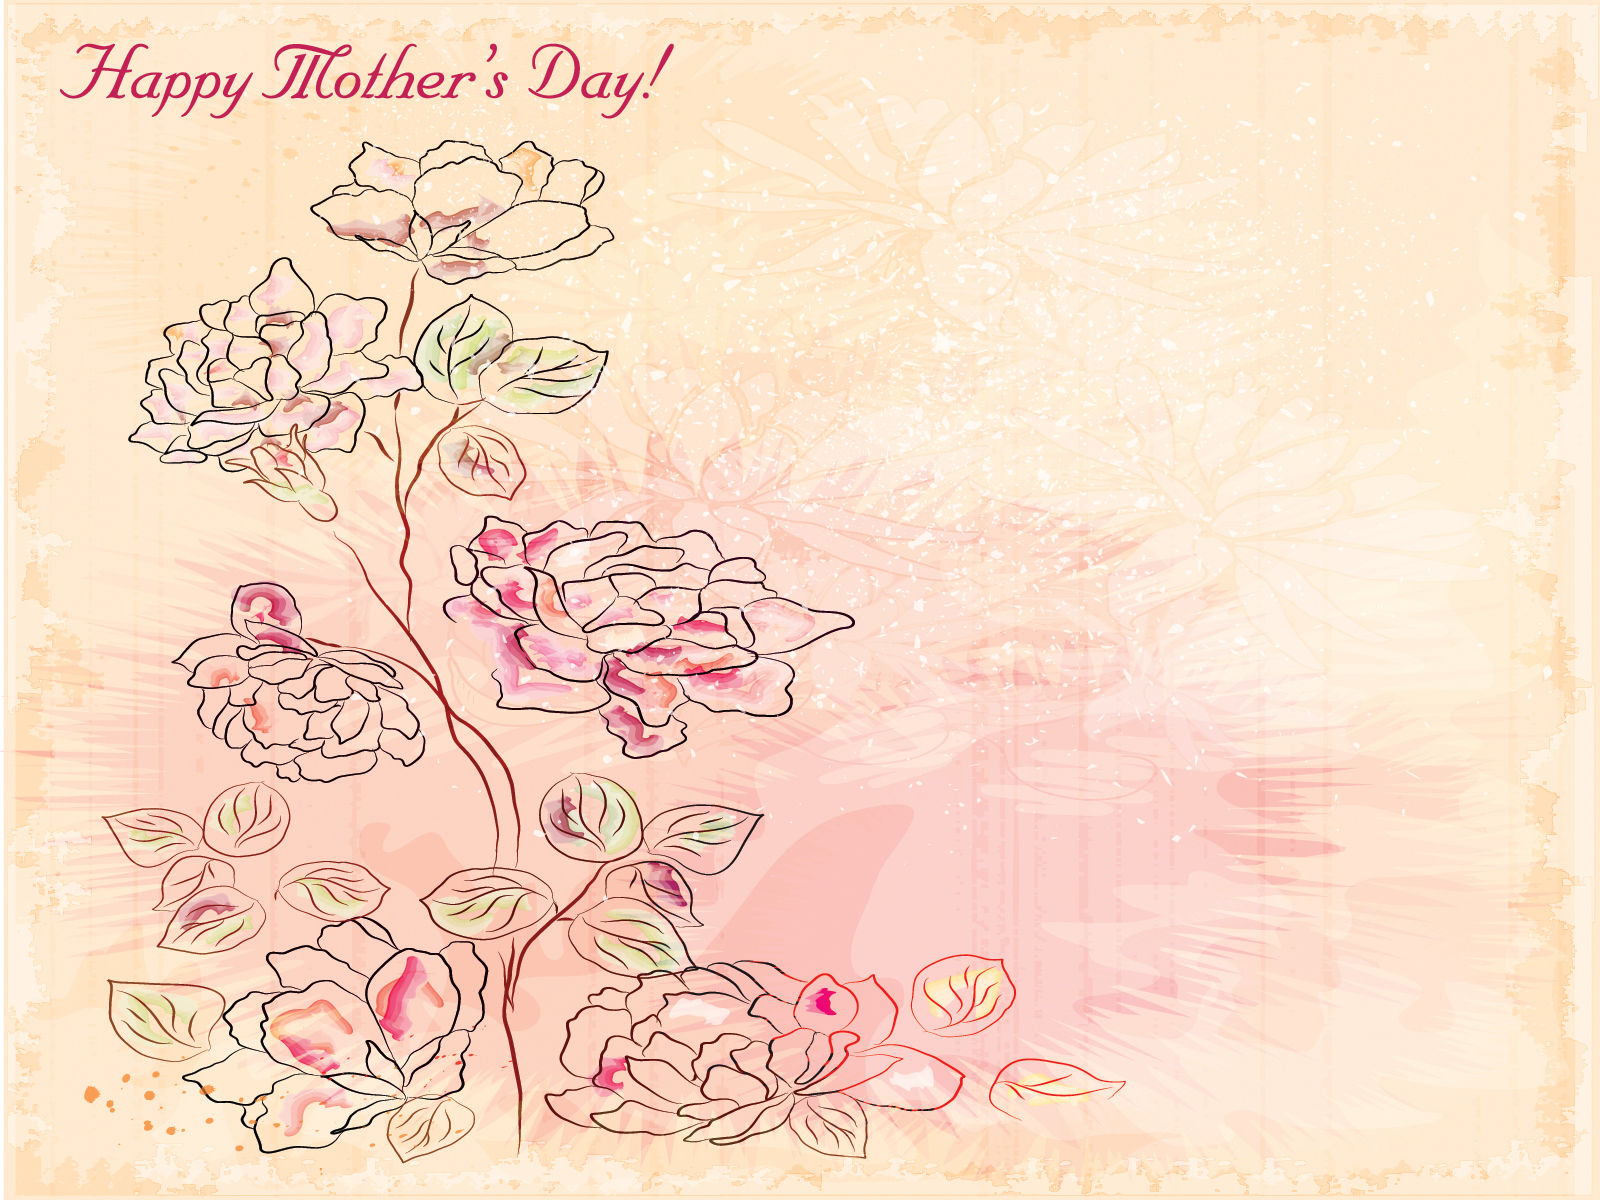 Happy Mothers Day 2013 Powerpoint Templates - Brown, Fuchsia ...